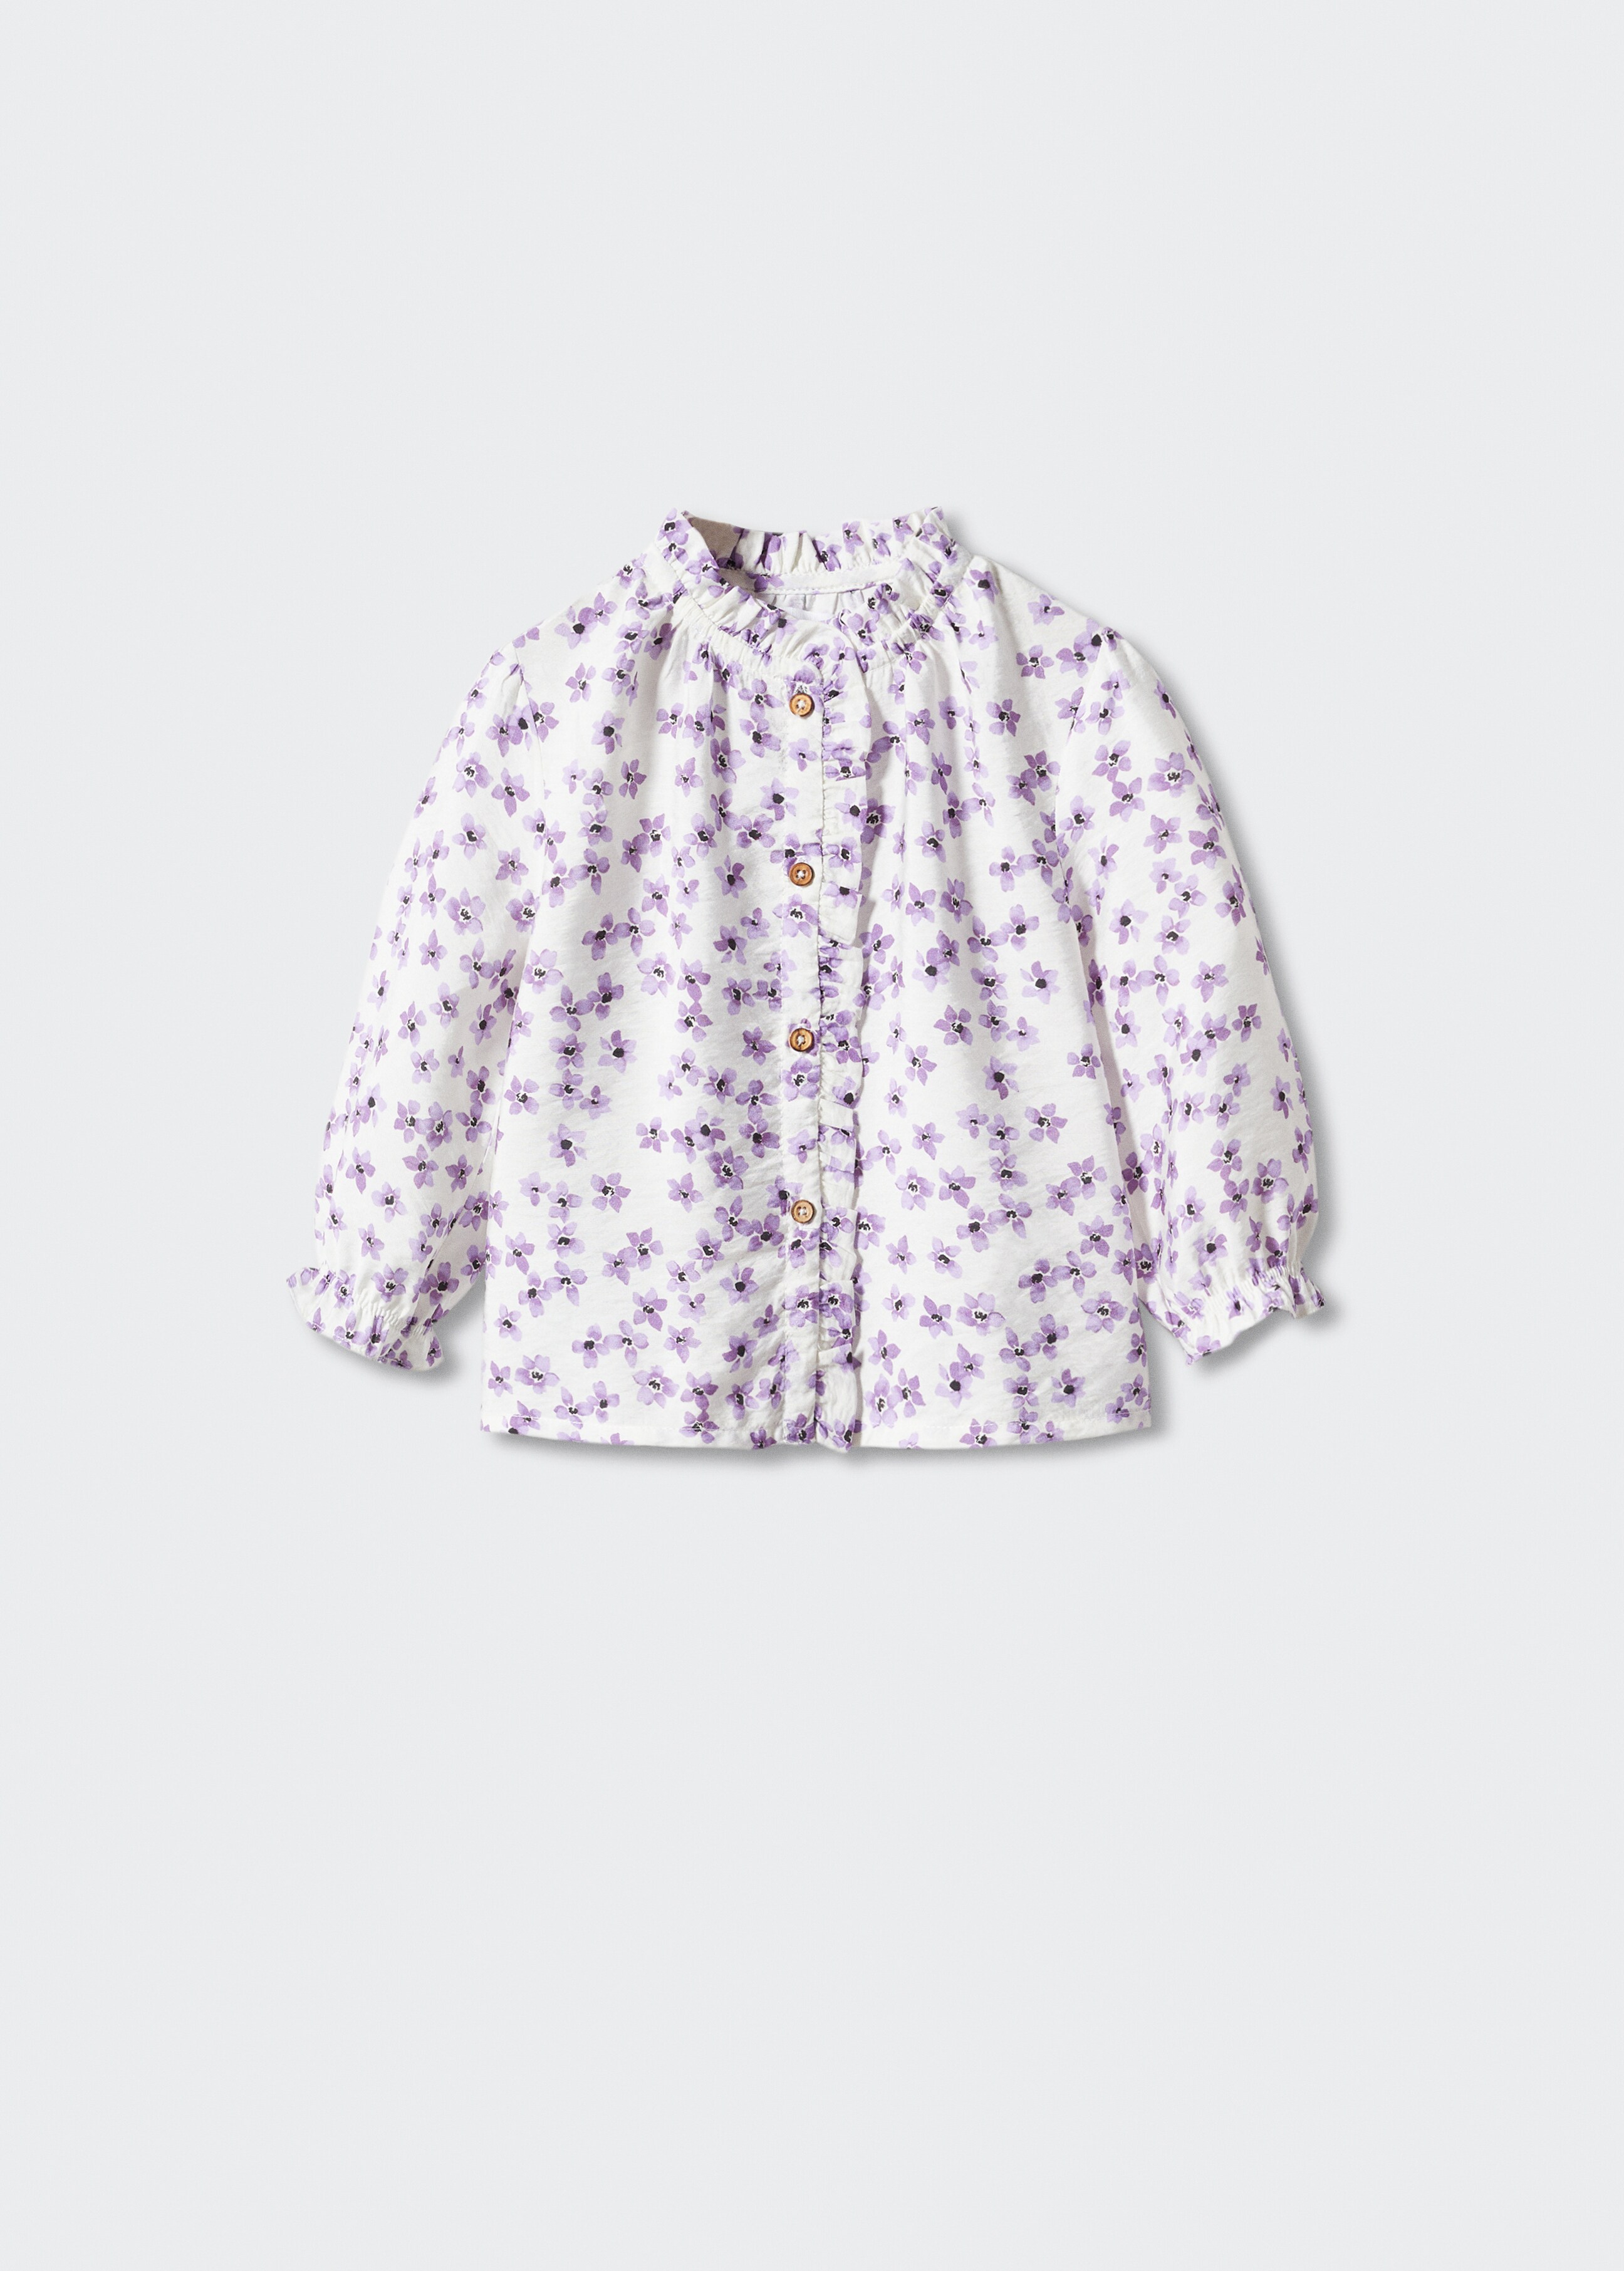 Floral print blouse - Article without model